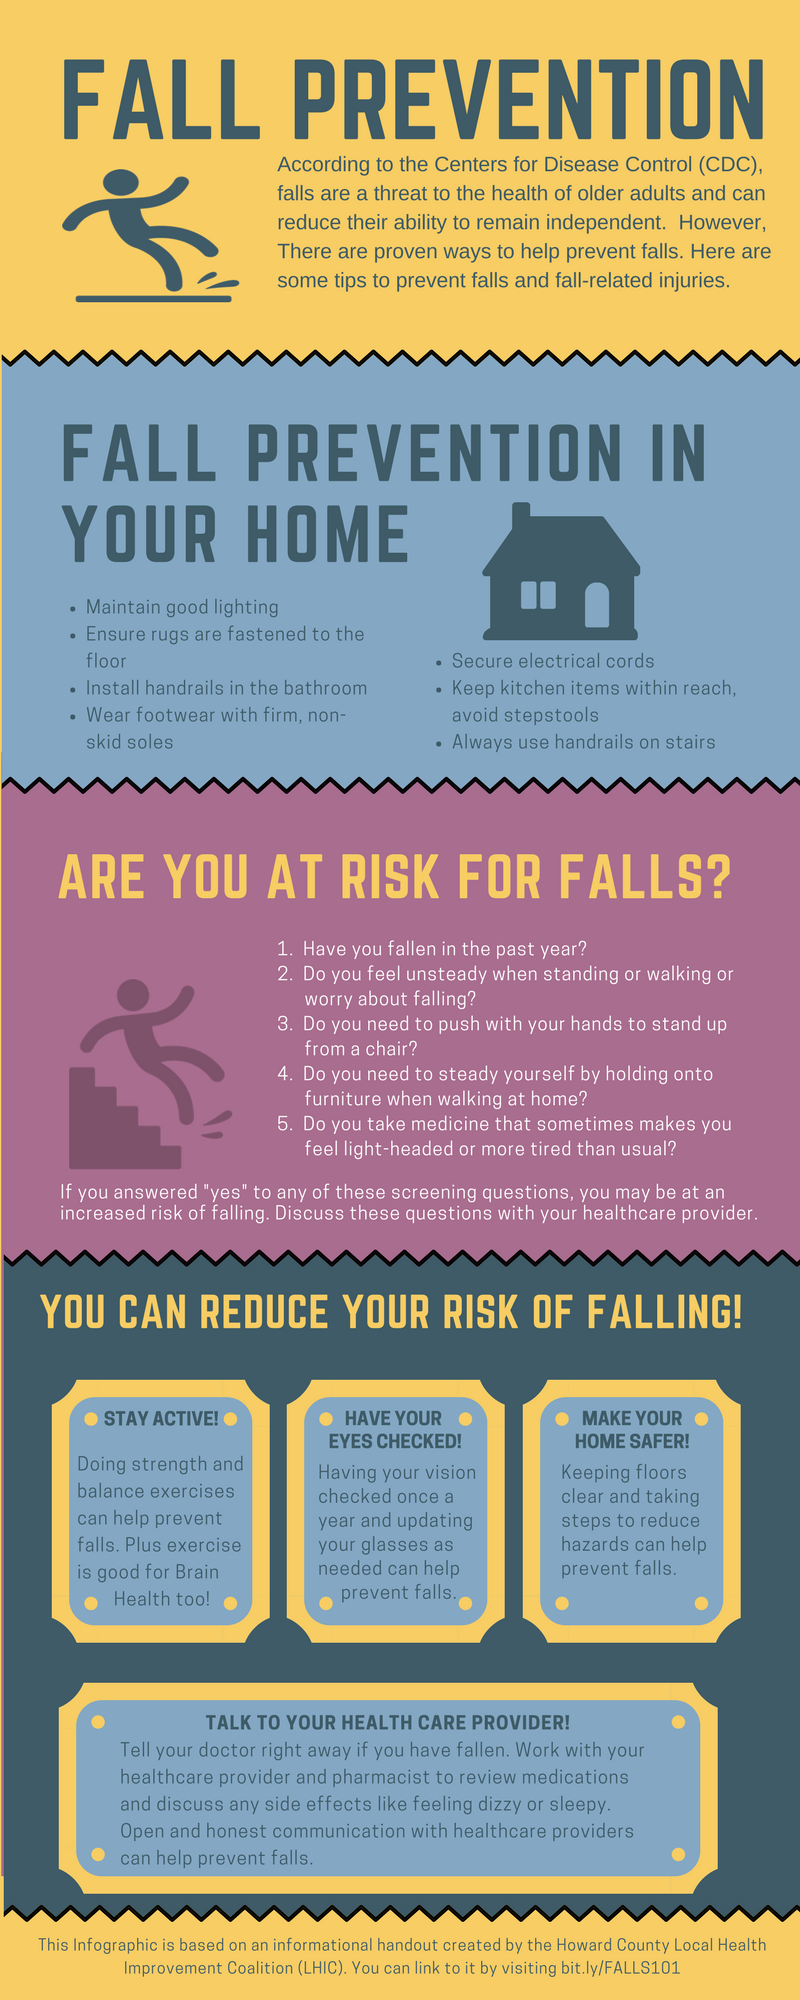 Preventing Falls Infographic